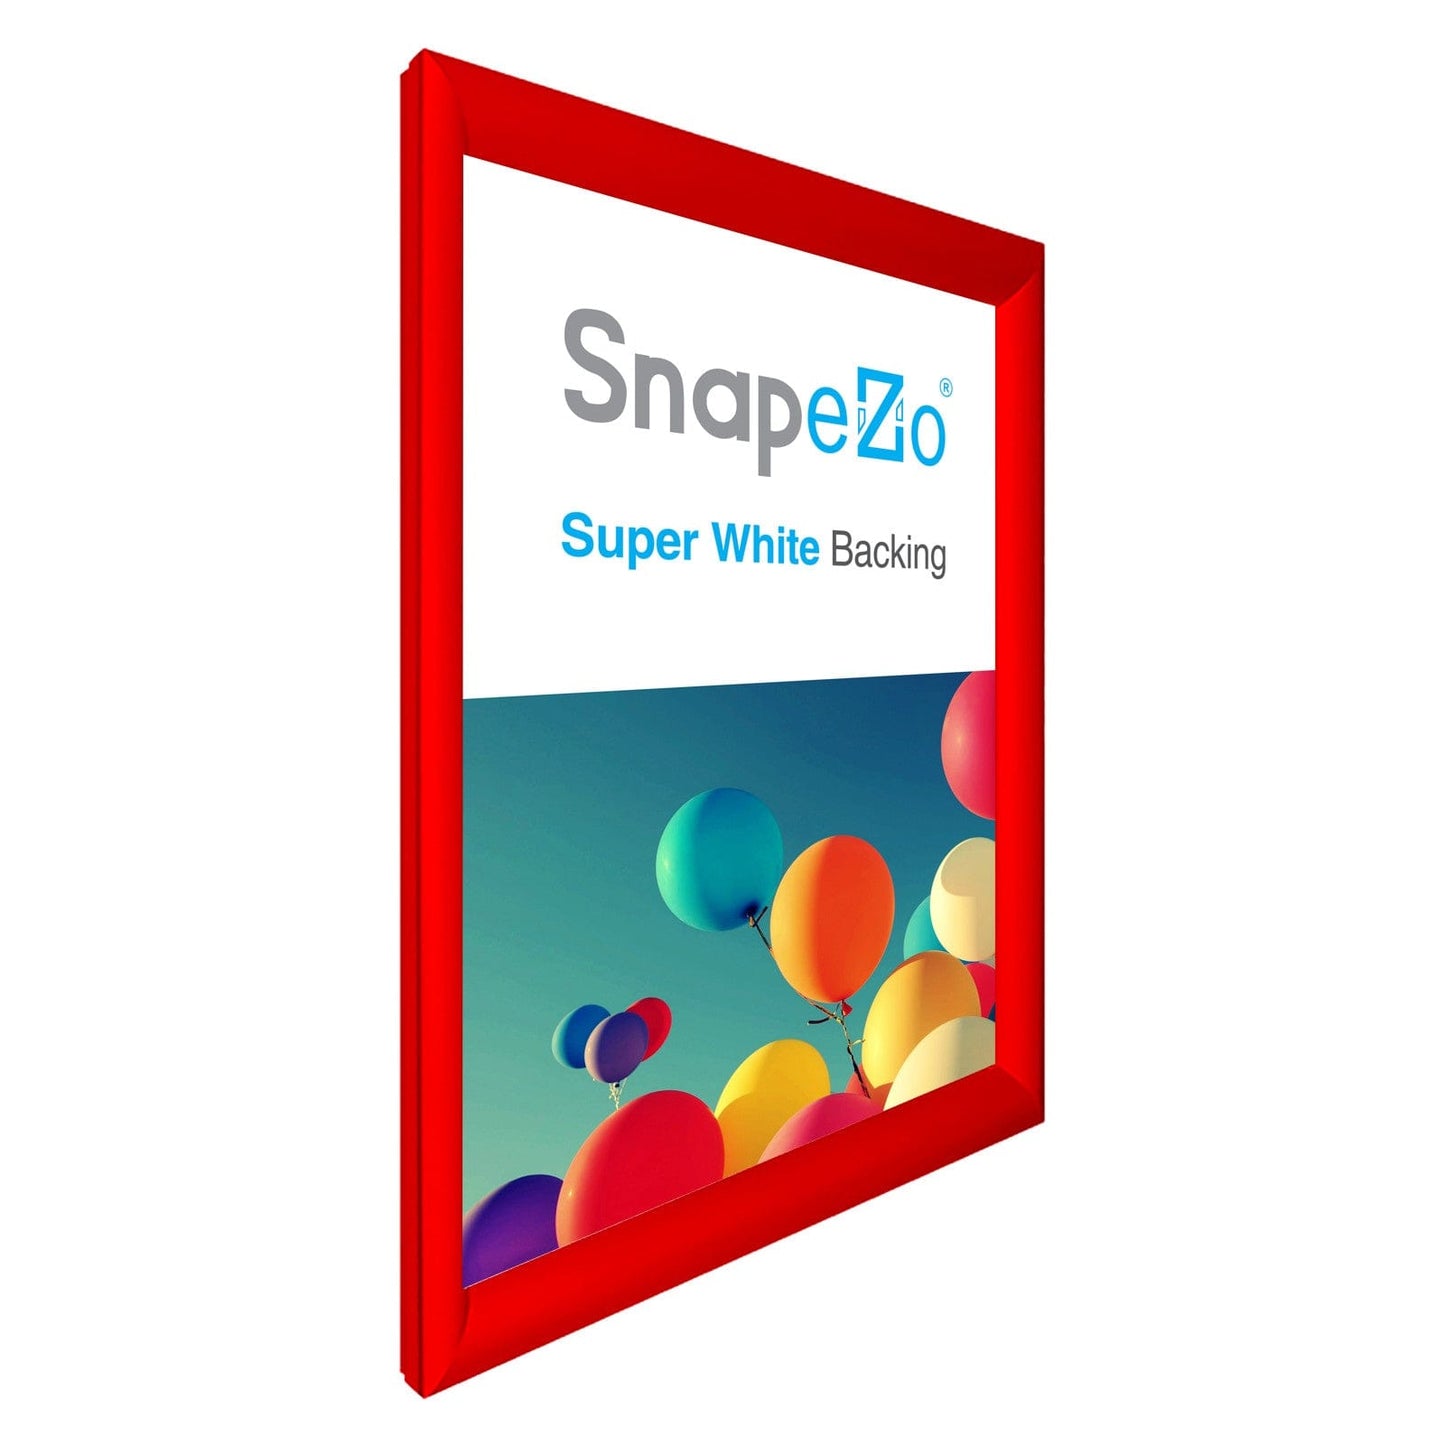 24x34 Red SnapeZo® Snap Frame - 1.2" Profile - Snap Frames Direct